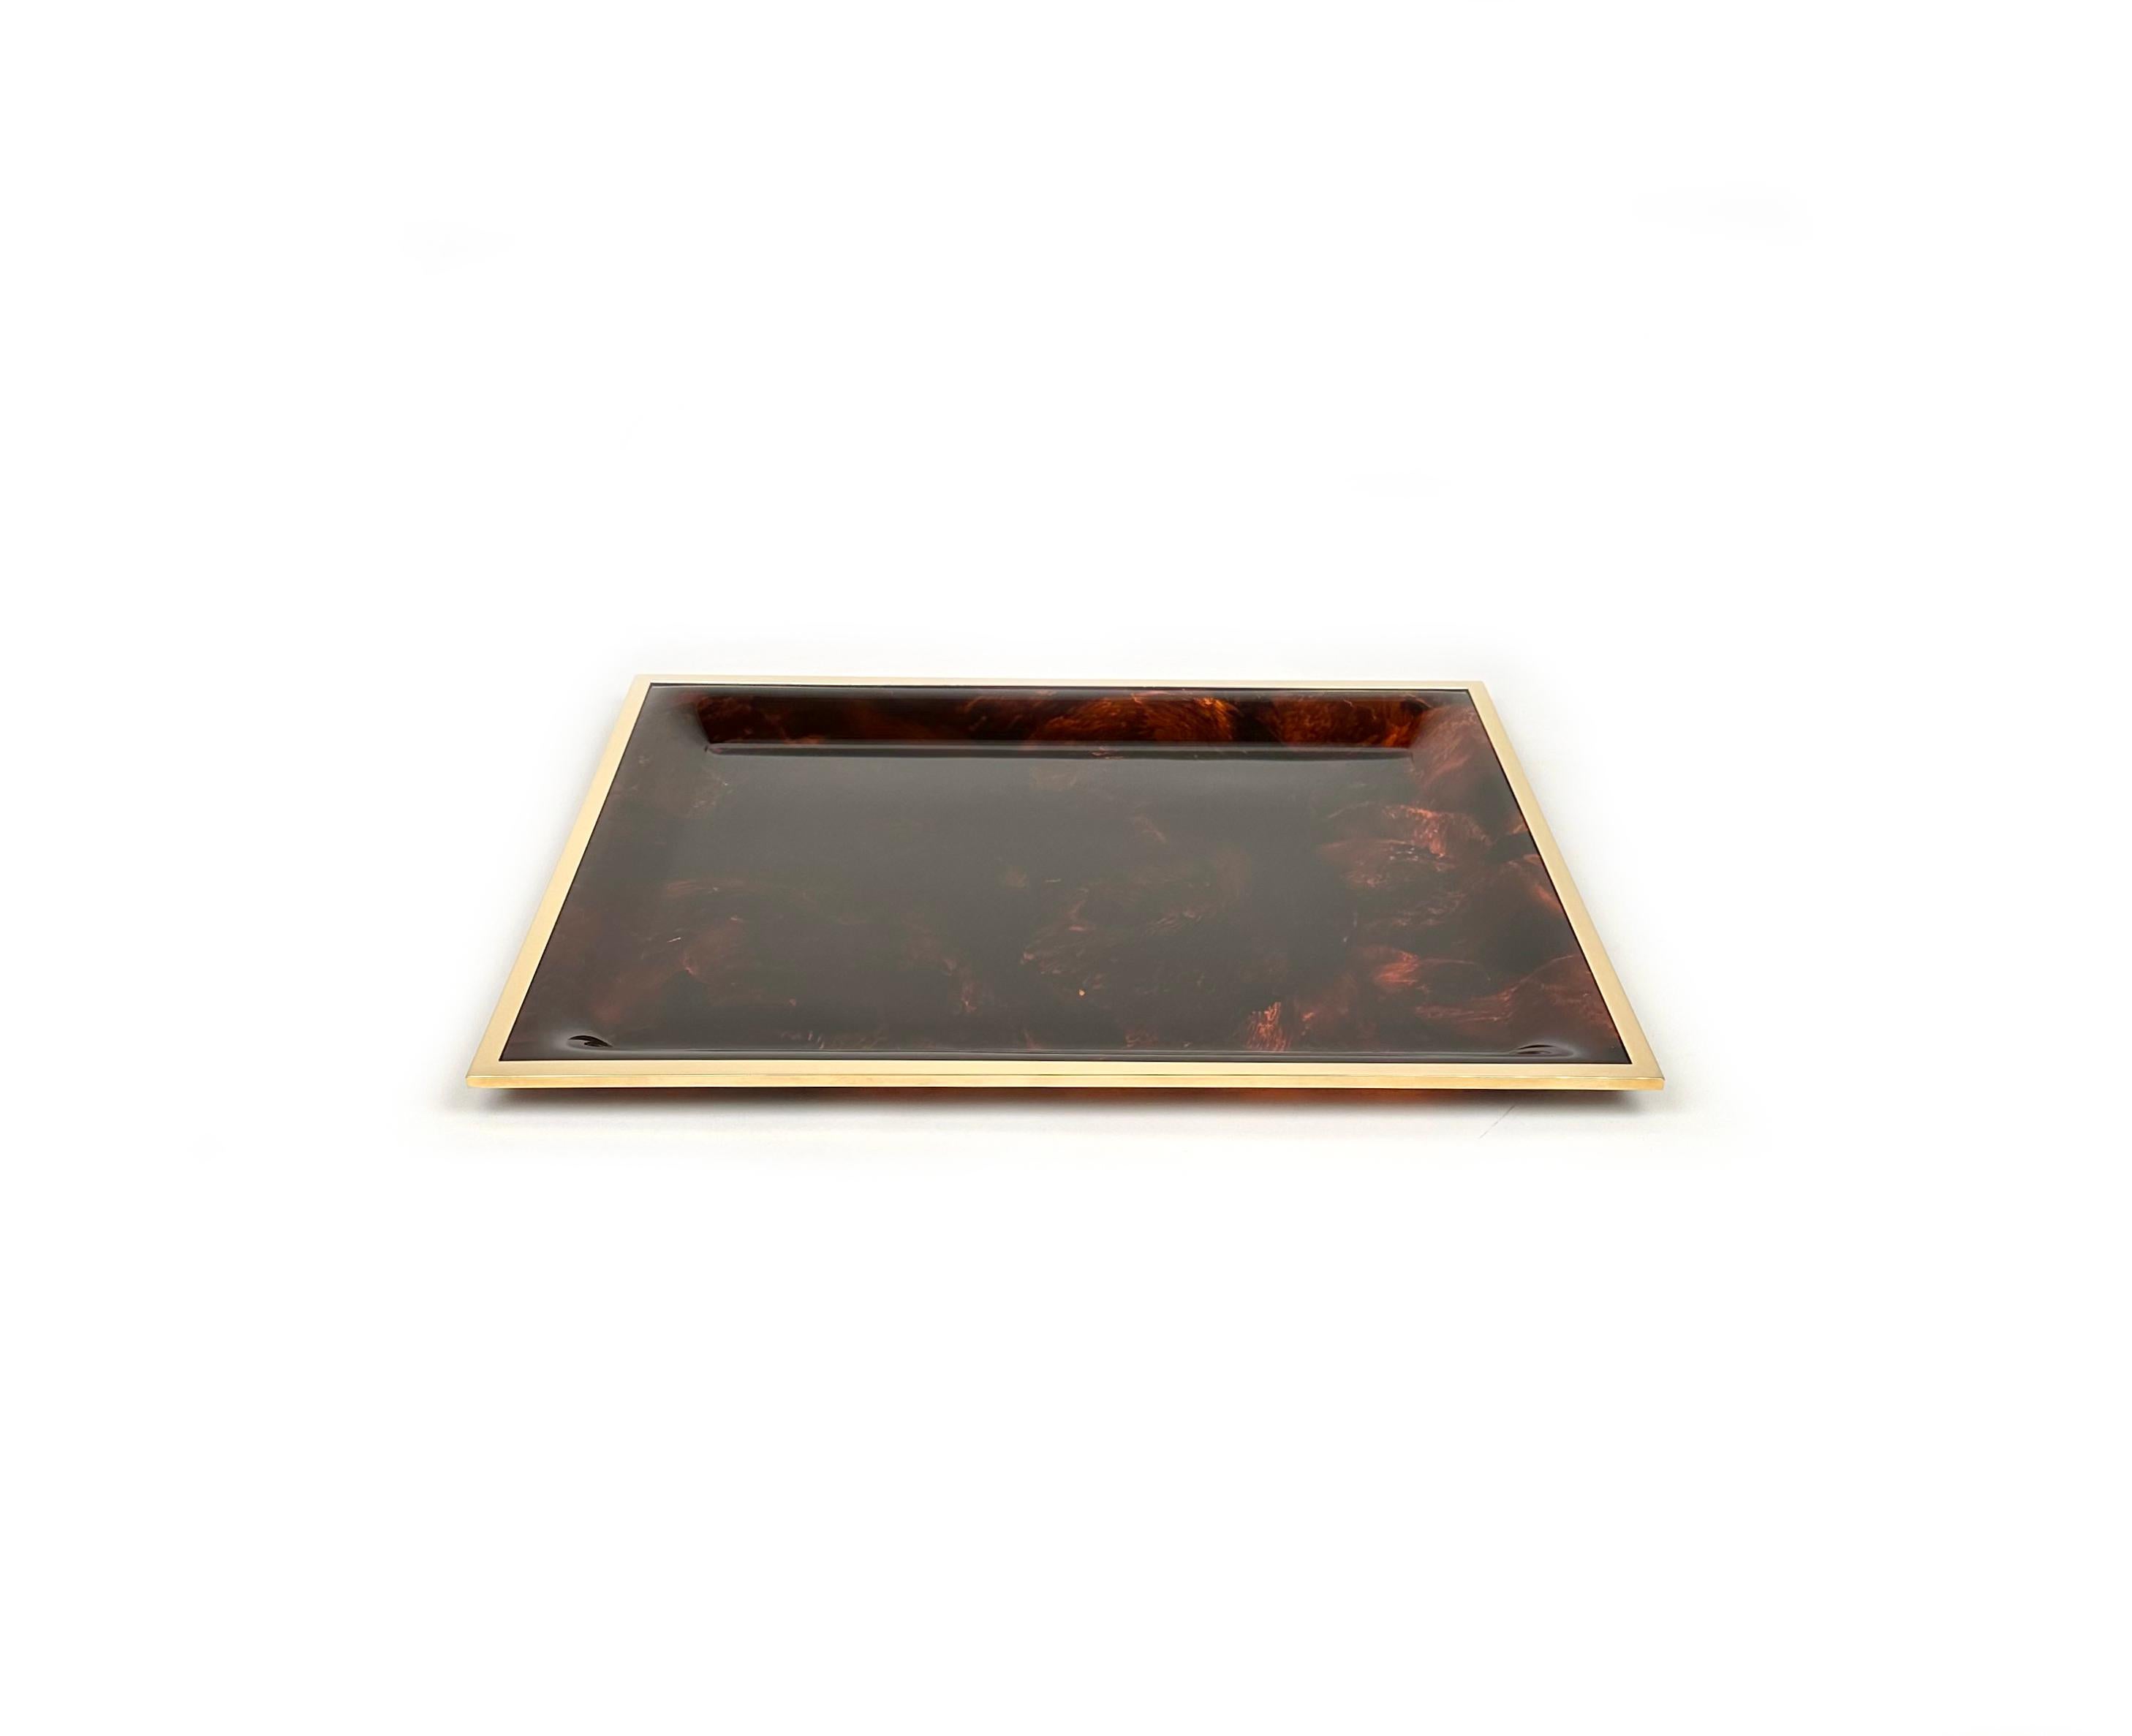 Amazing large rectangular serving tray or vide-poche in tortoiseshell effect Lucite and brass borders in the style of Christian Dior. 

Made in Italy in the 1970s. 

Great accessory for any modern interior.